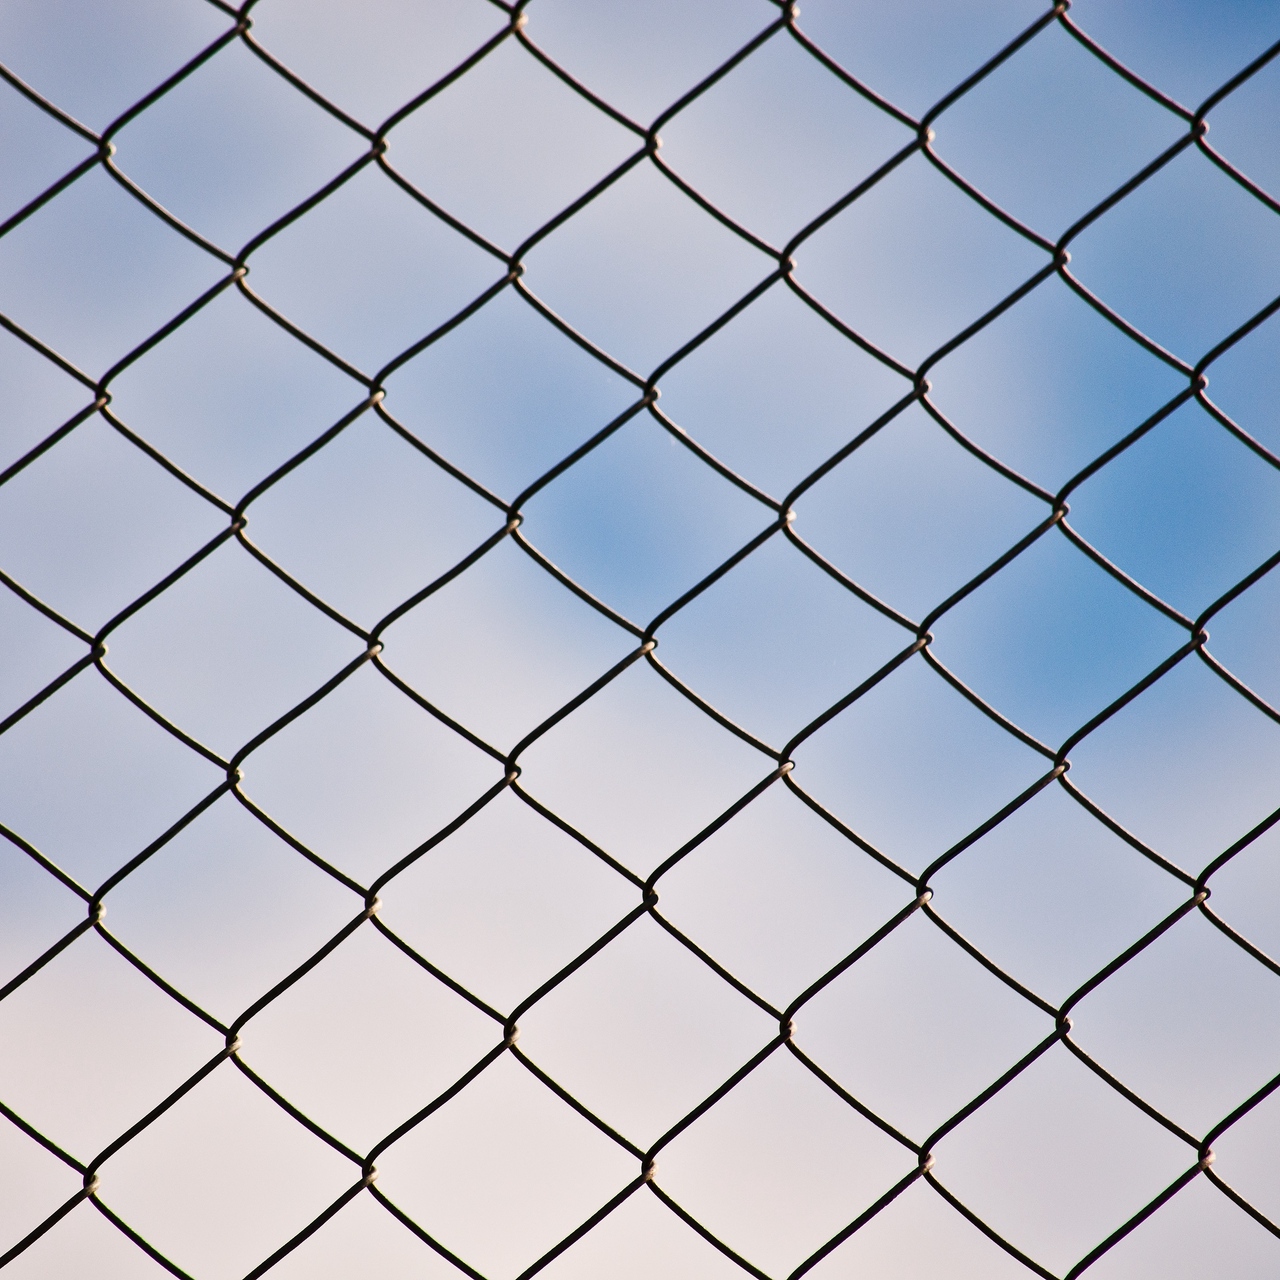 Wallpaper Mesh, Sky, Braided, Wire, Pattern - Chain-link Fencing - HD Wallpaper 